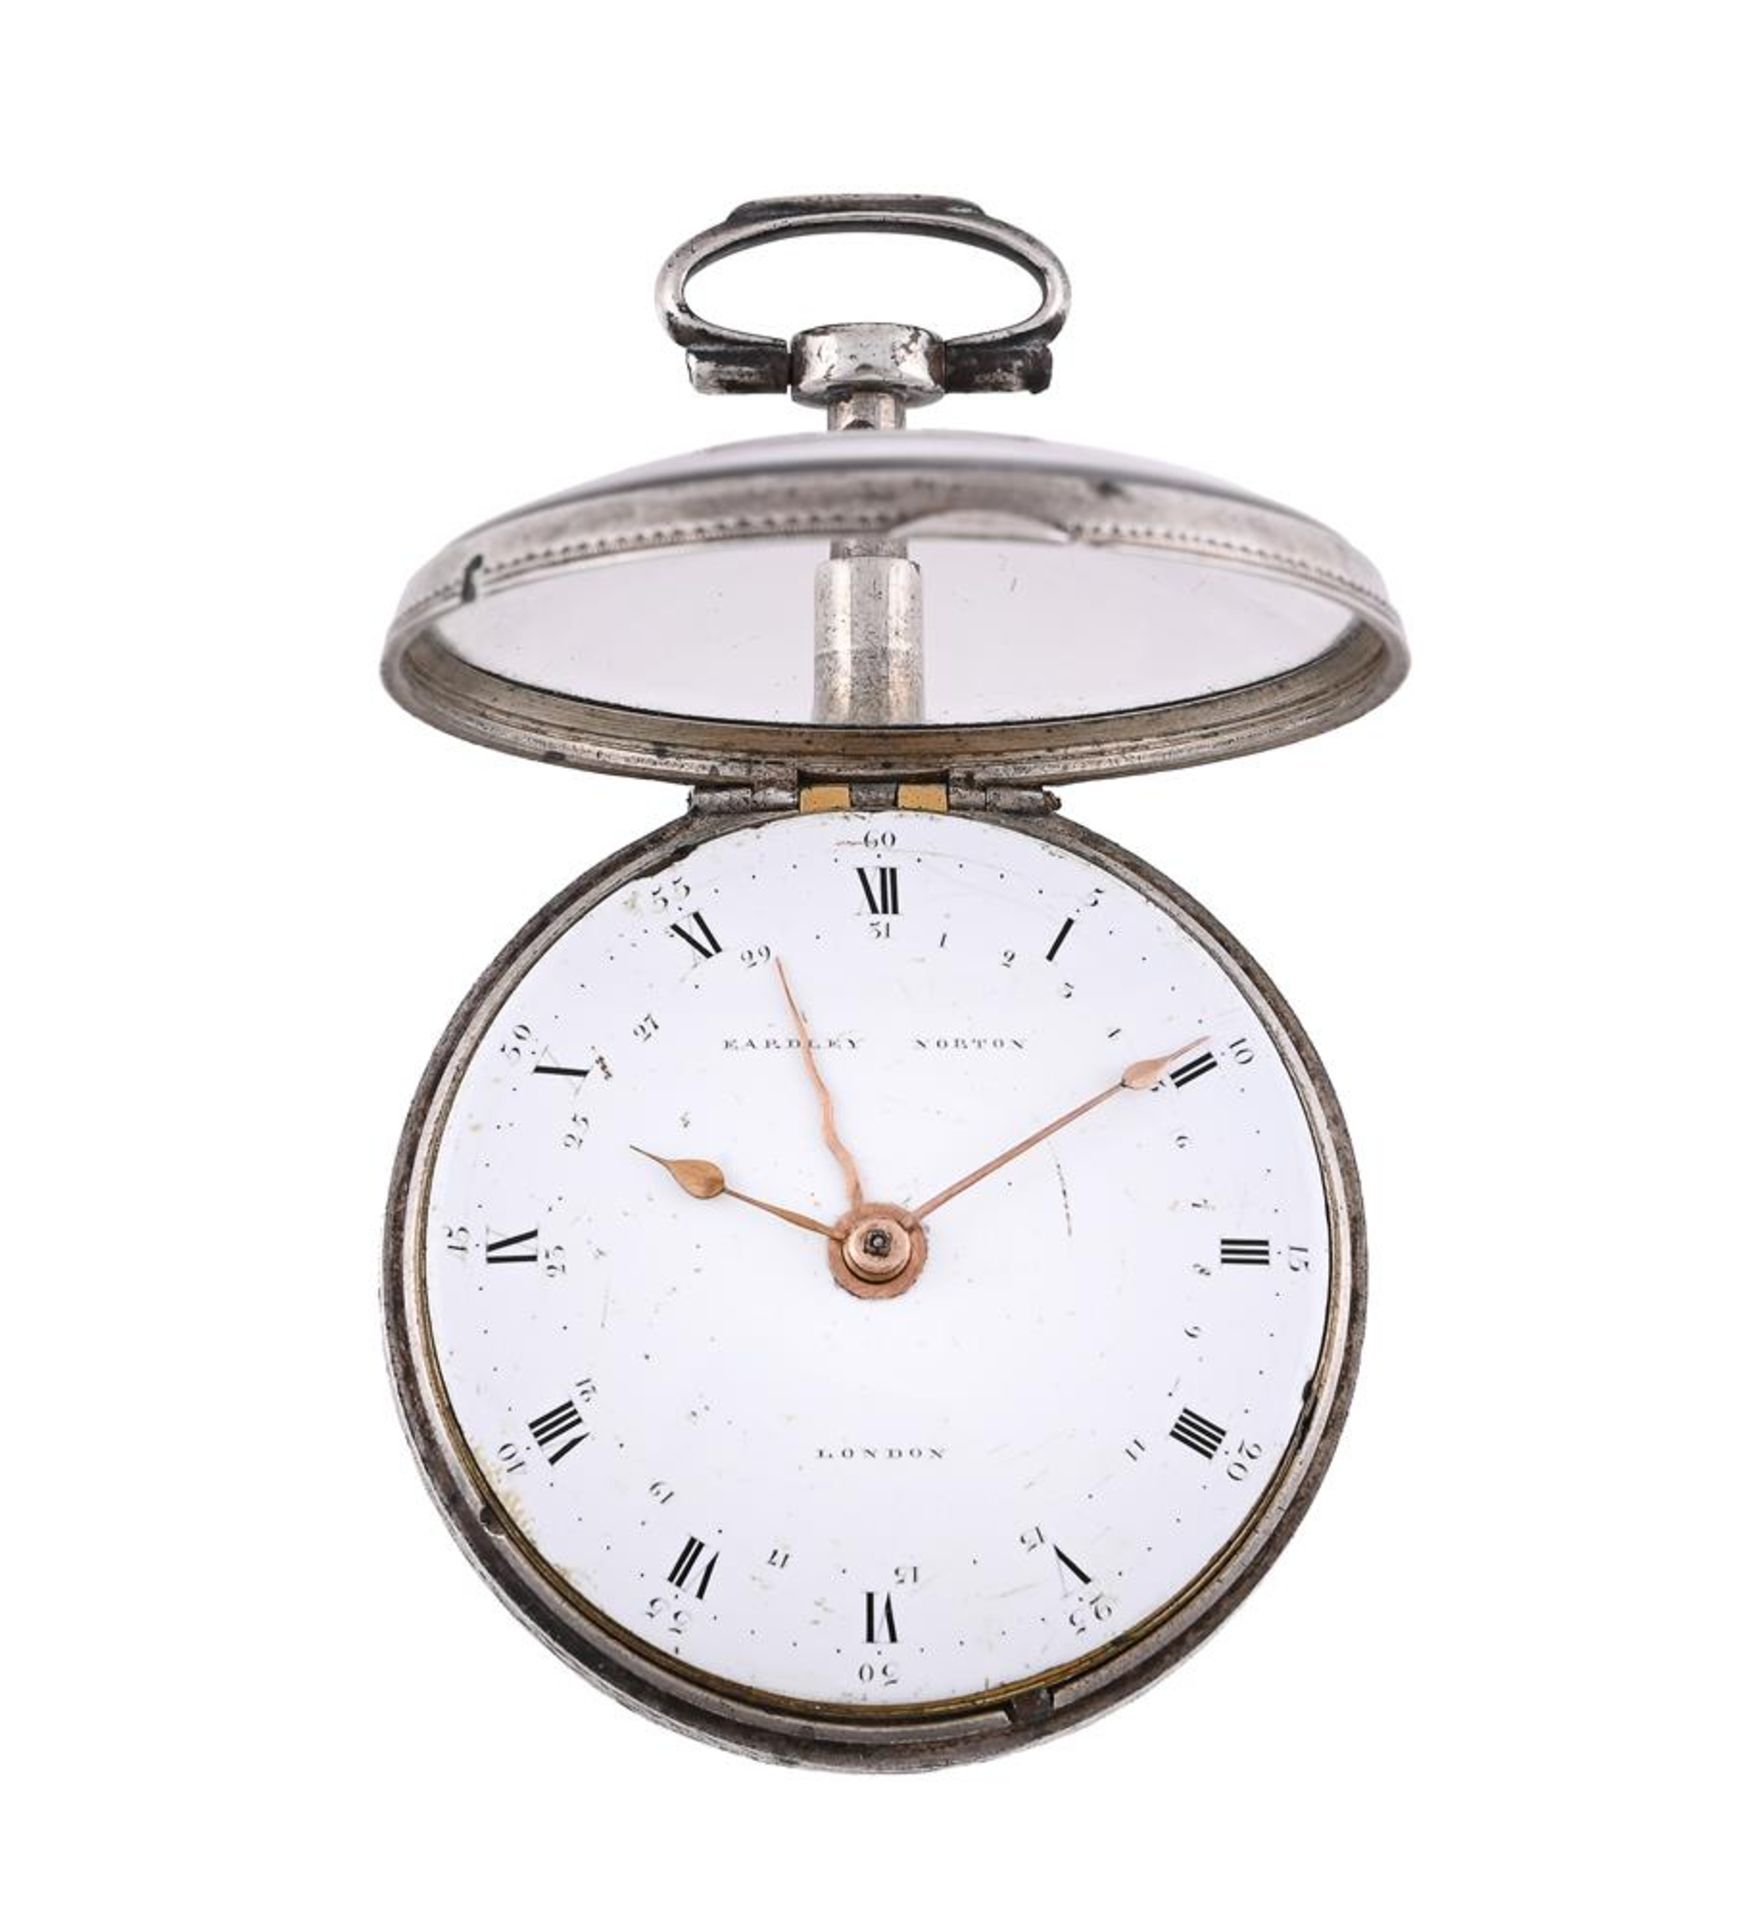 A GEORGE III SILVER PAIR-CASED VERGE QUARTER-REPEATING POCKET WATCH WITH SWEEP CALENDAR - Image 2 of 3